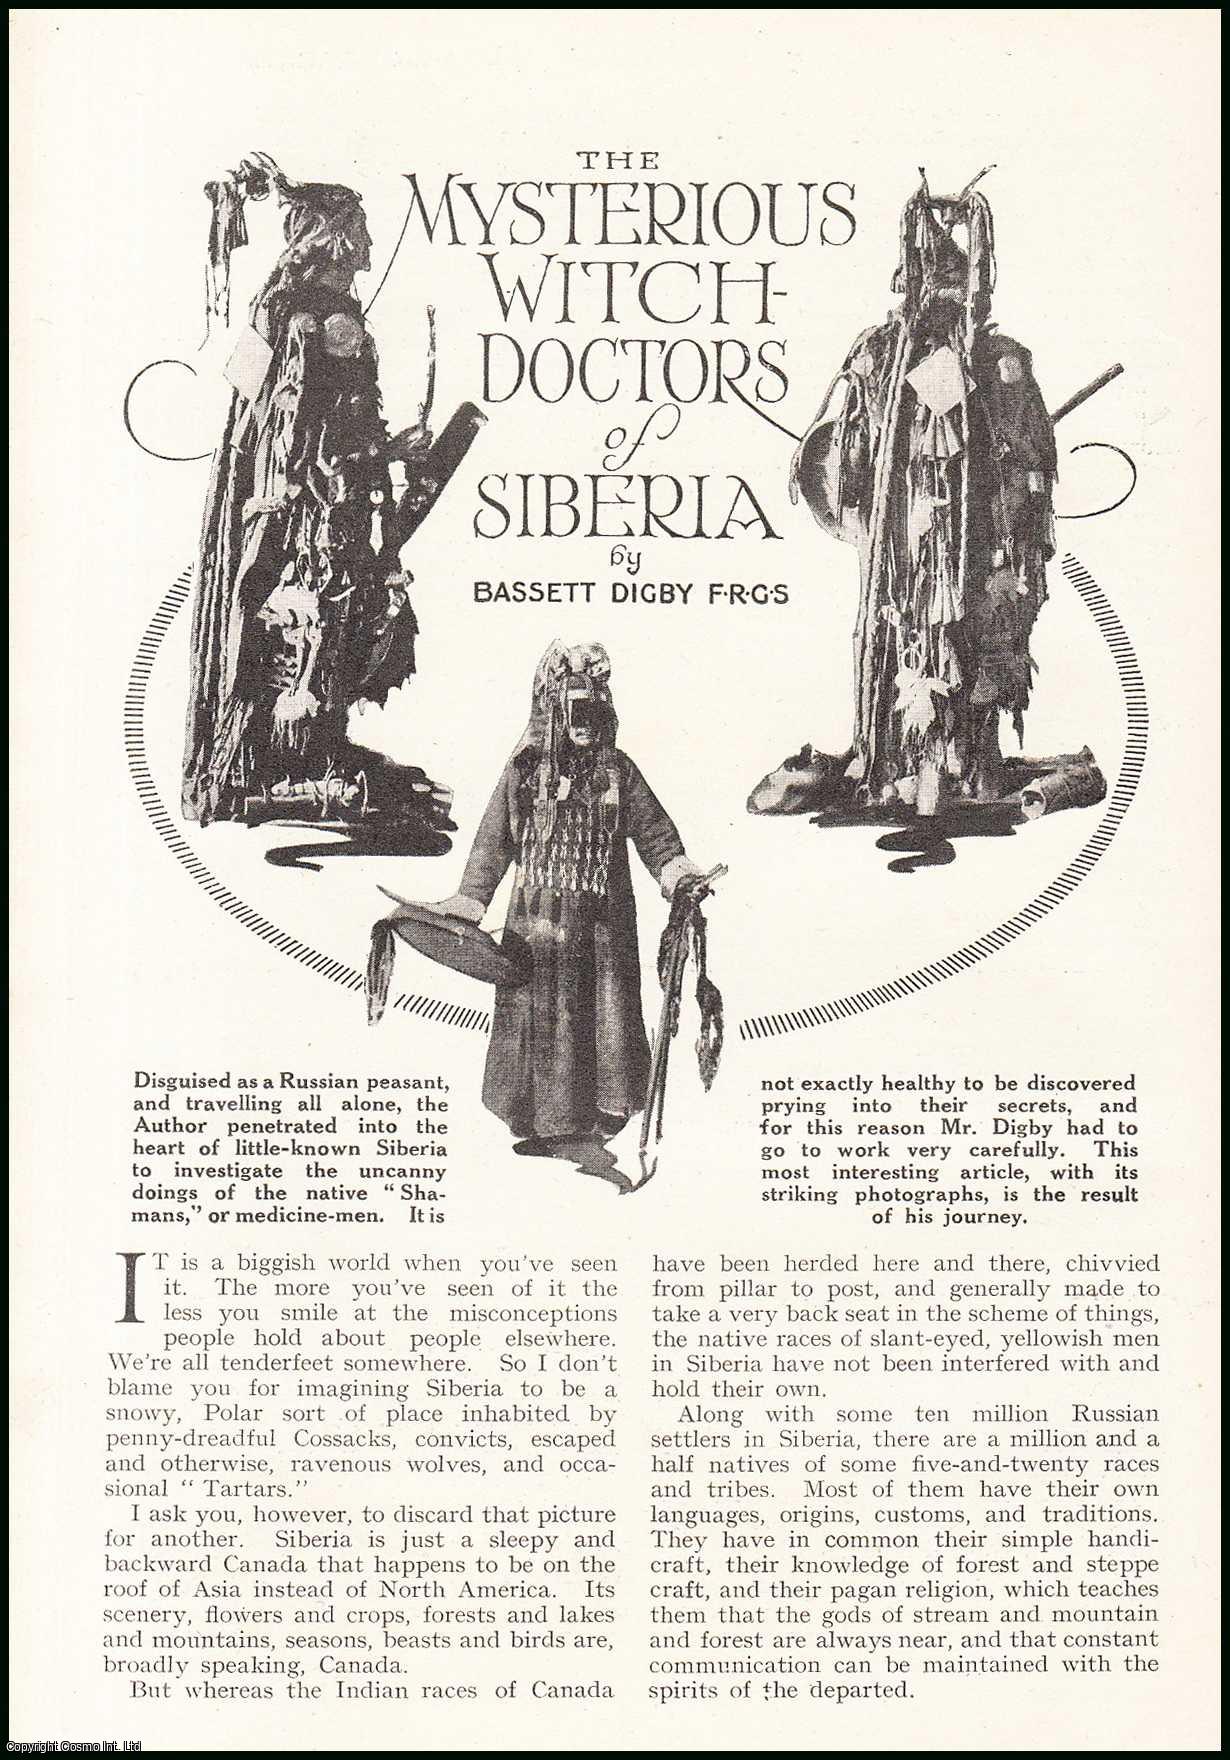 Bassett Digby, F.R.G.S. - The Mysterious Witch-Doctors of Siberia. An uncommon original article from the Wide World Magazine, 1922.